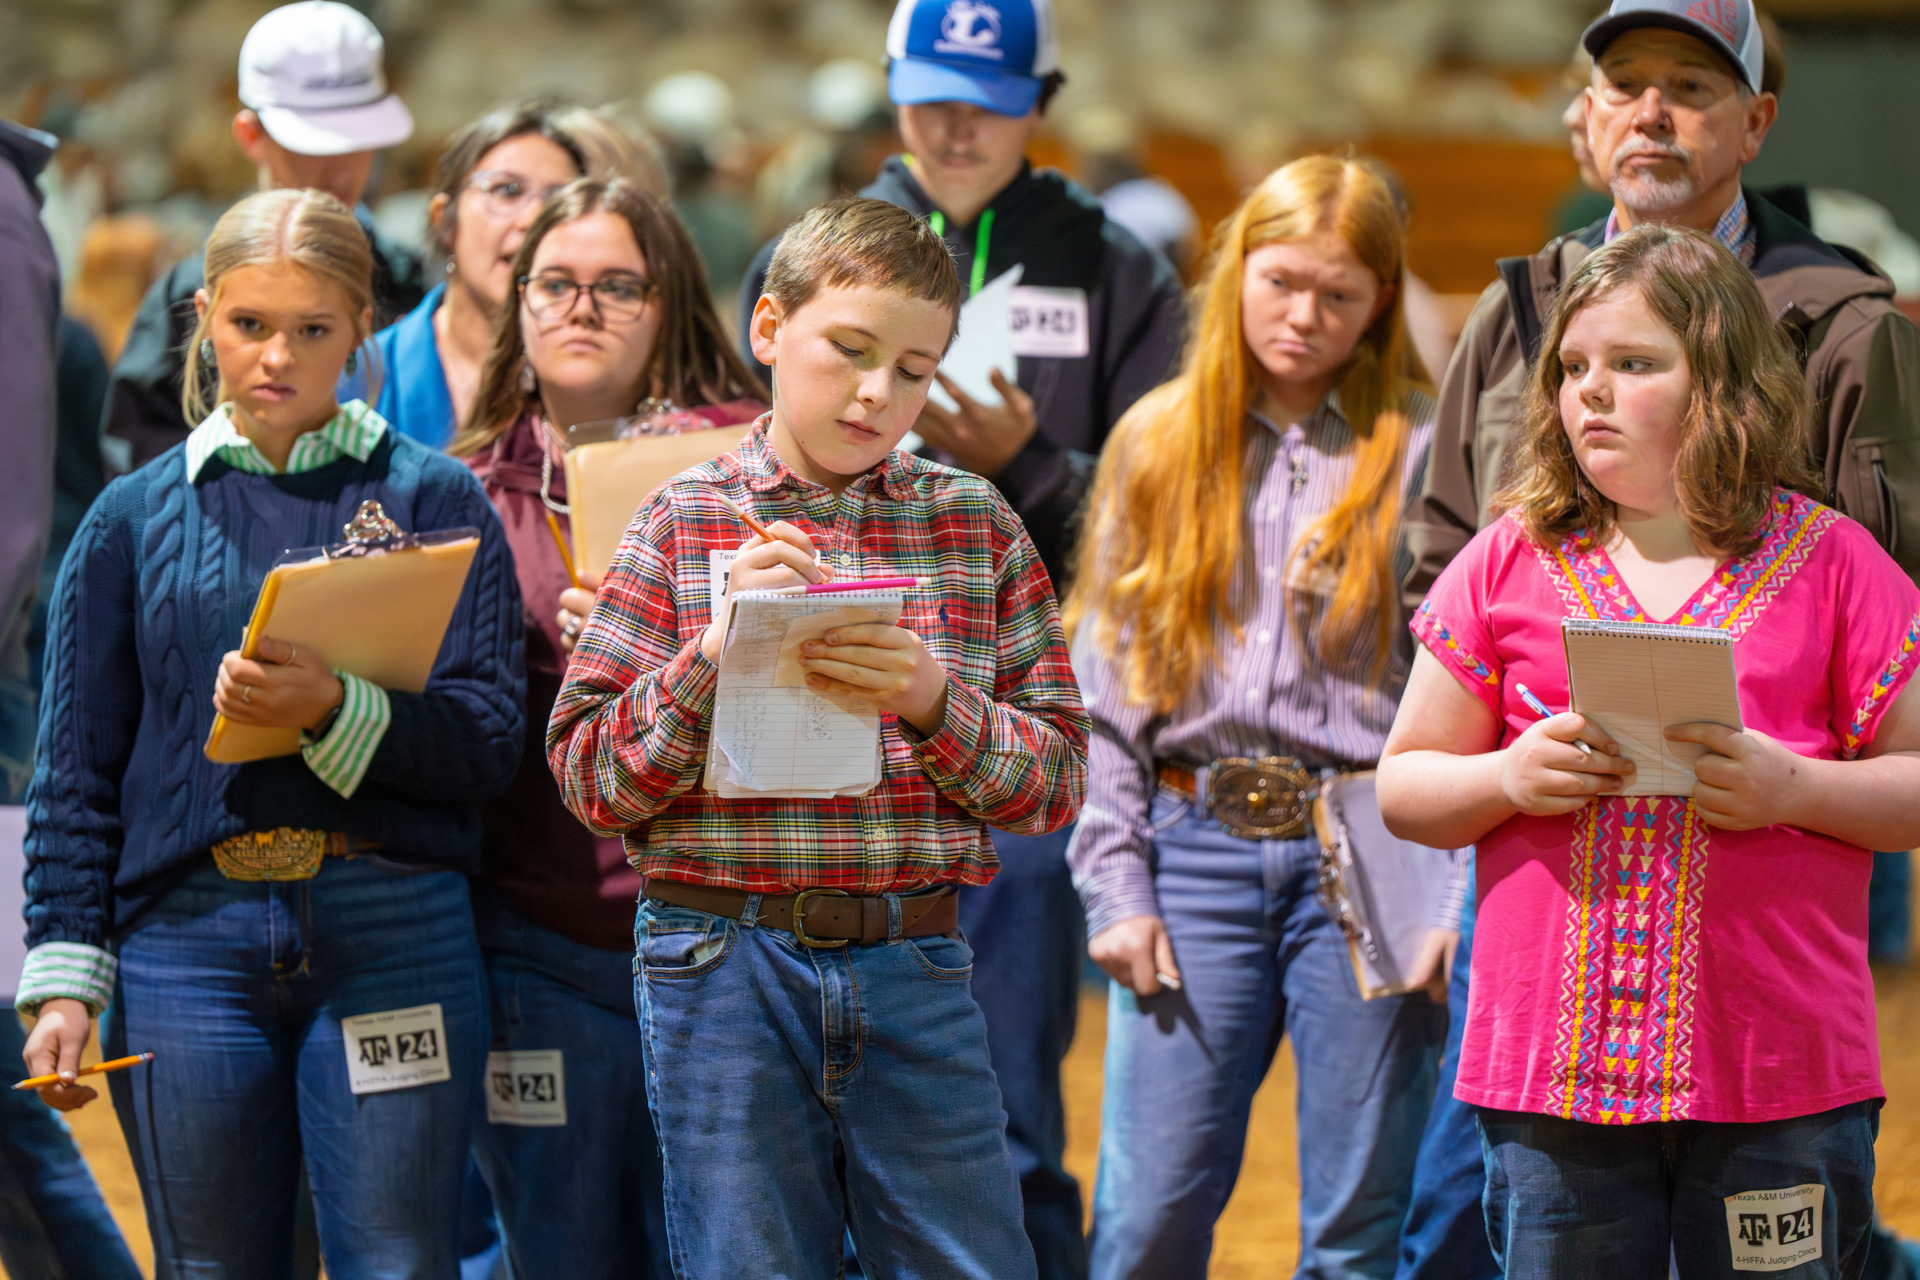 Animal science judging clinics provide hands-on learning and skills to youth